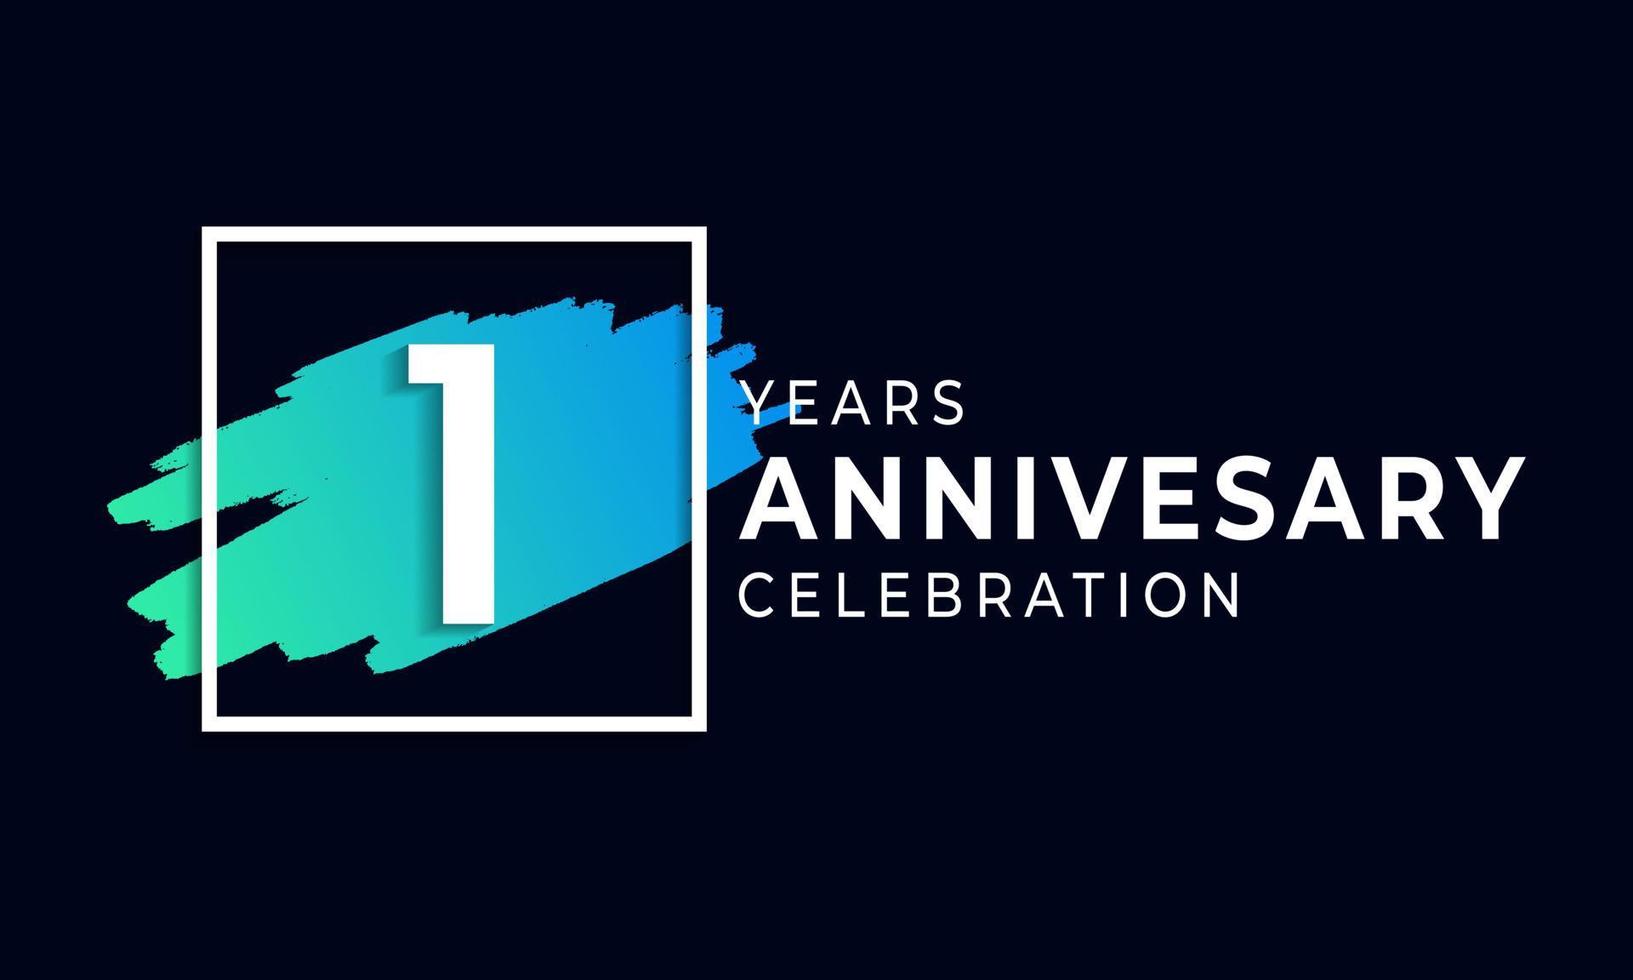 1 Year Anniversary Celebration with Blue Brush and Square Symbol. Happy Anniversary Greeting Celebrates Event Isolated on Black Background vector